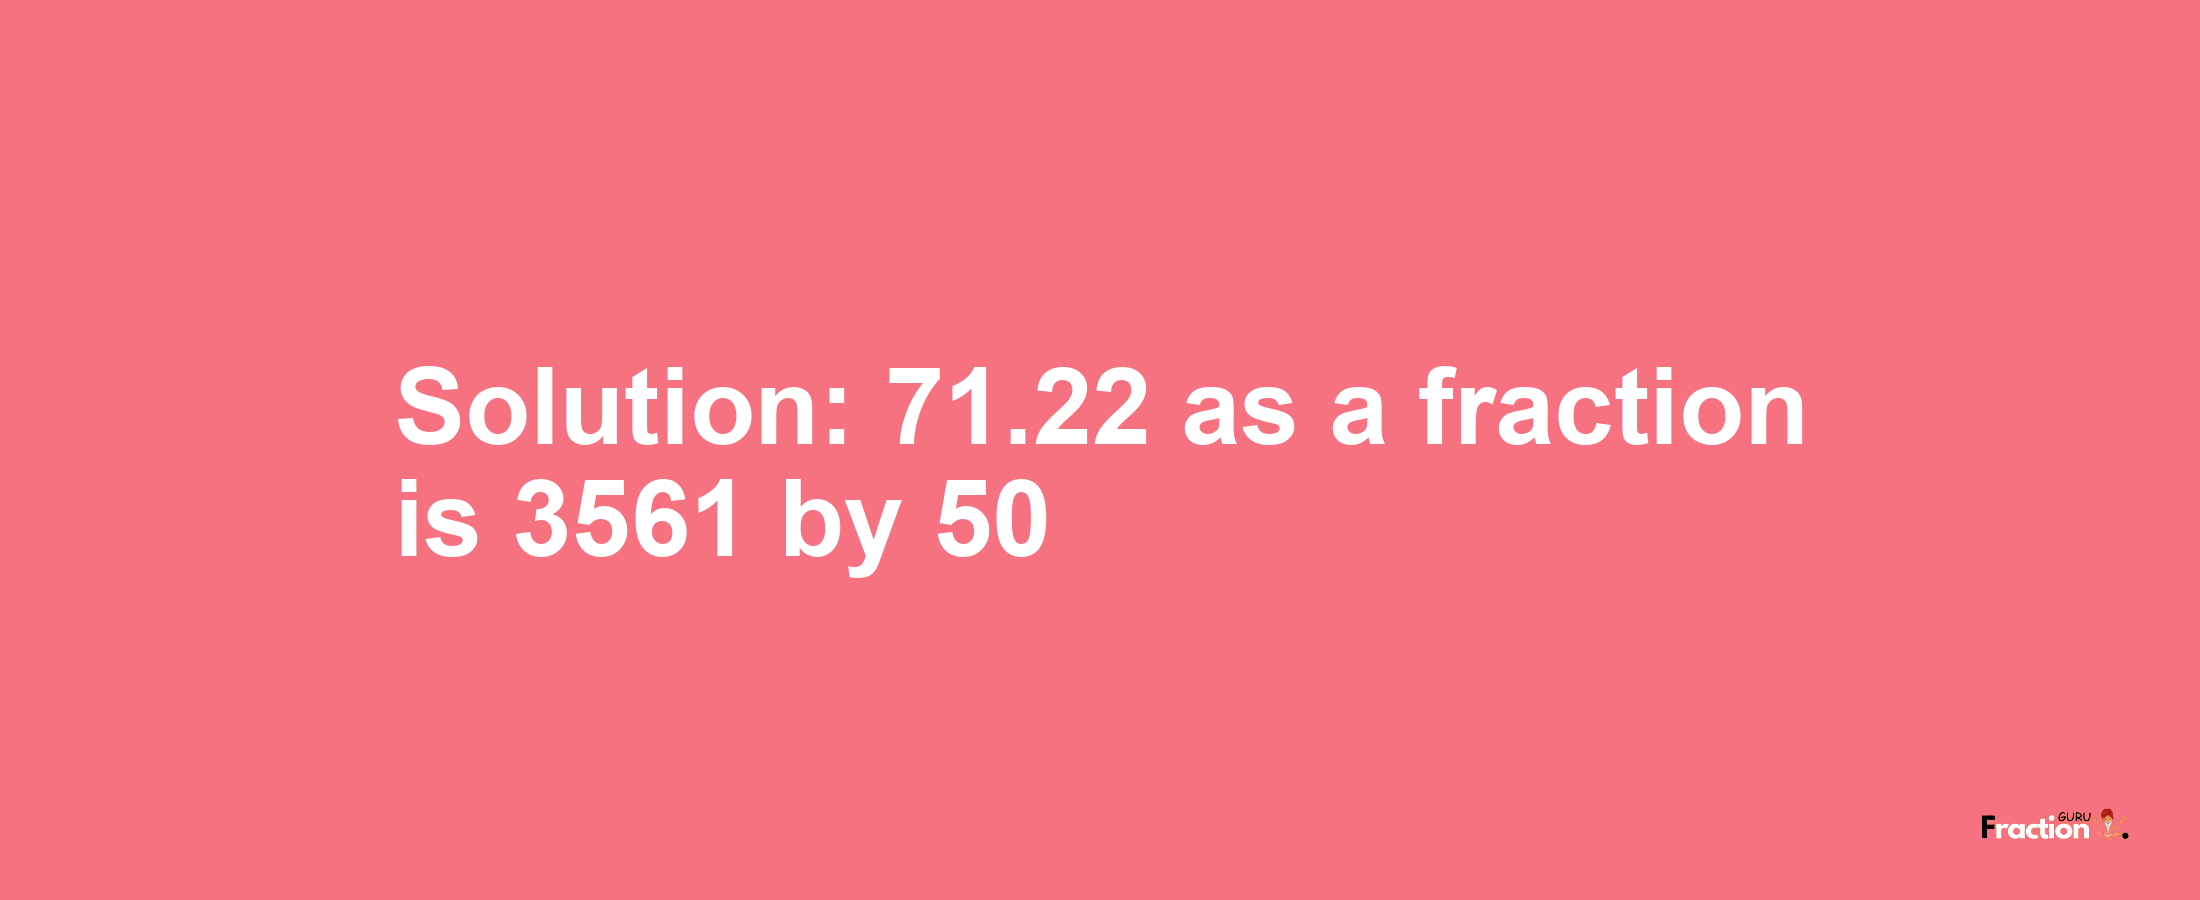 Solution:71.22 as a fraction is 3561/50